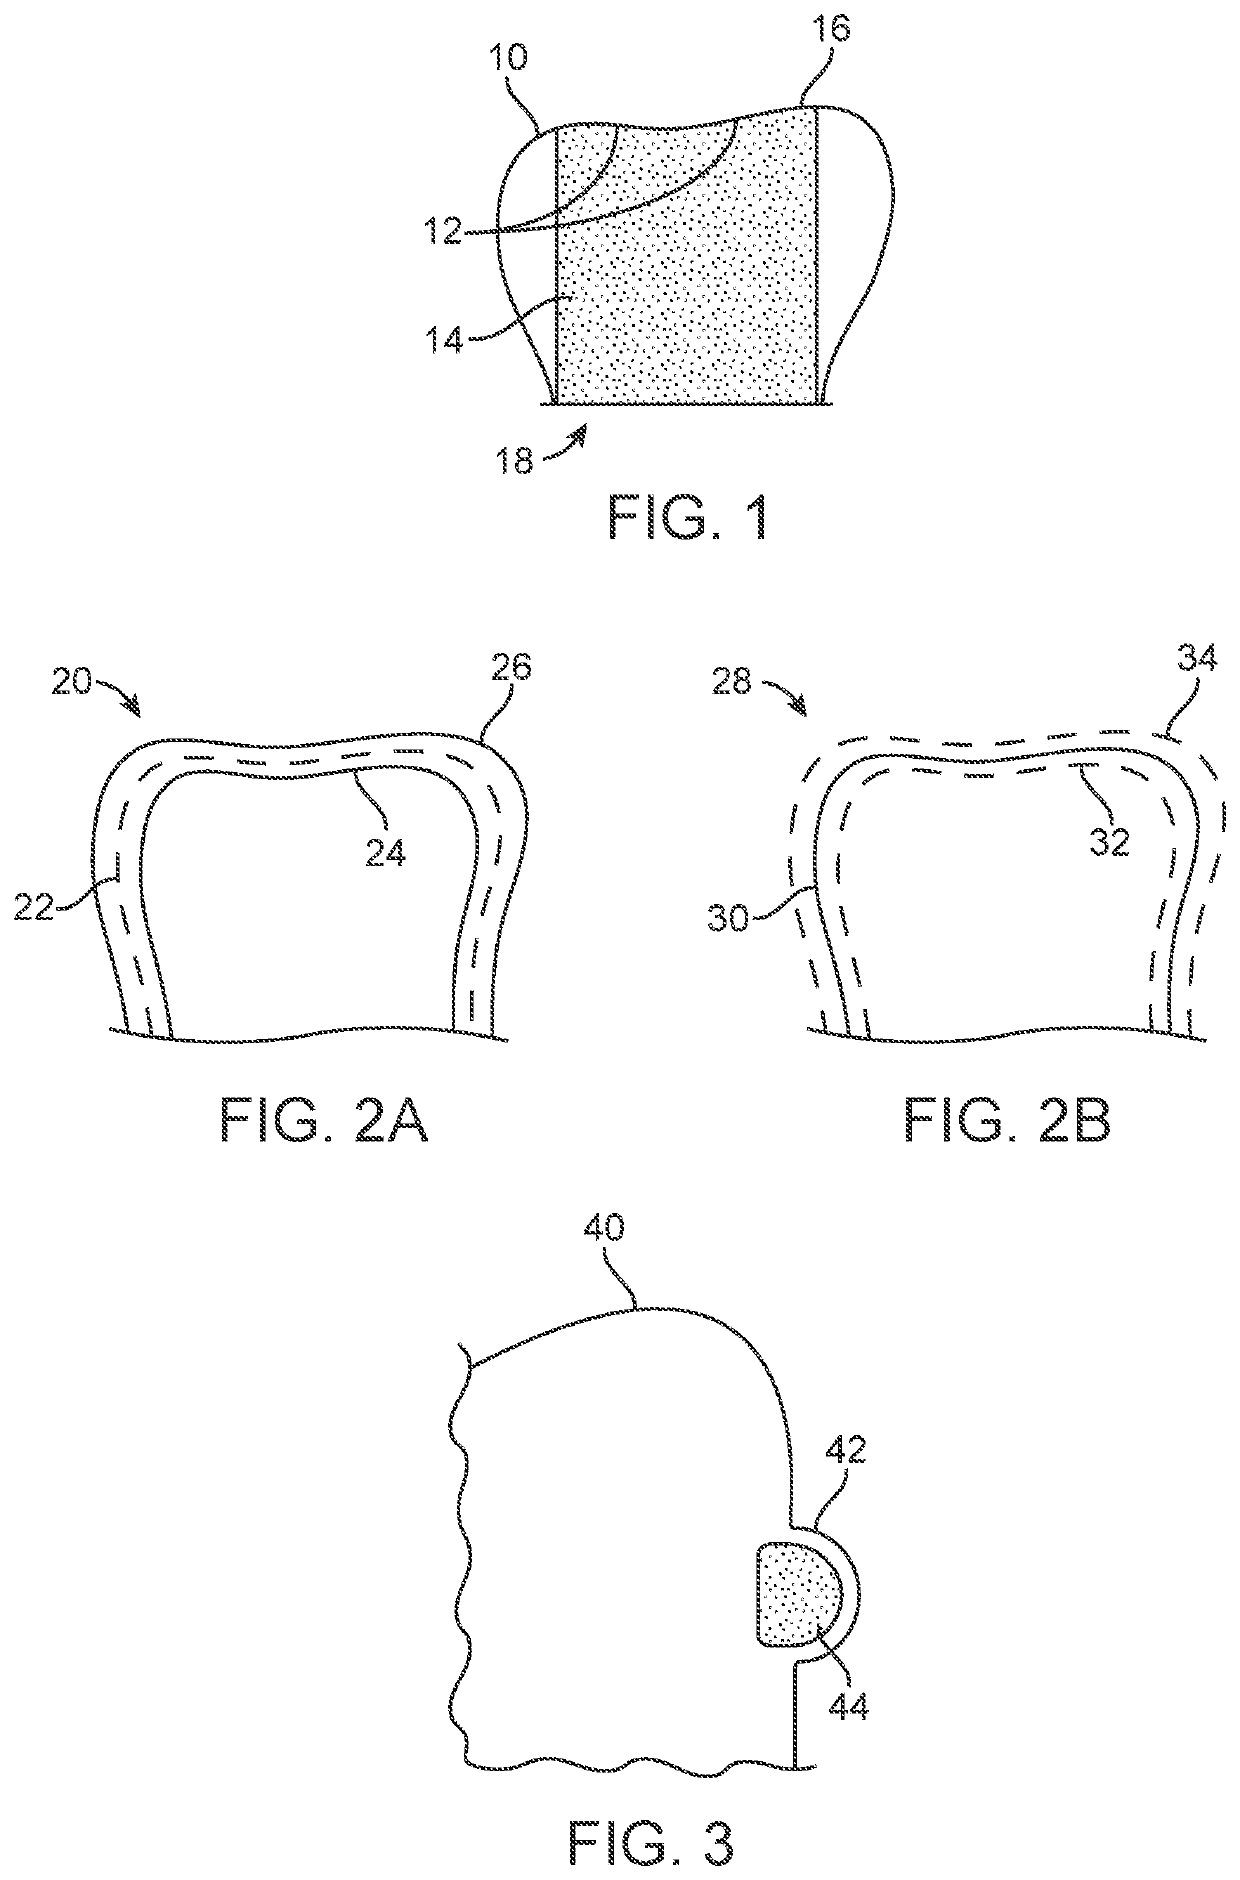 Three-dimensional printed dental appliances using support structures